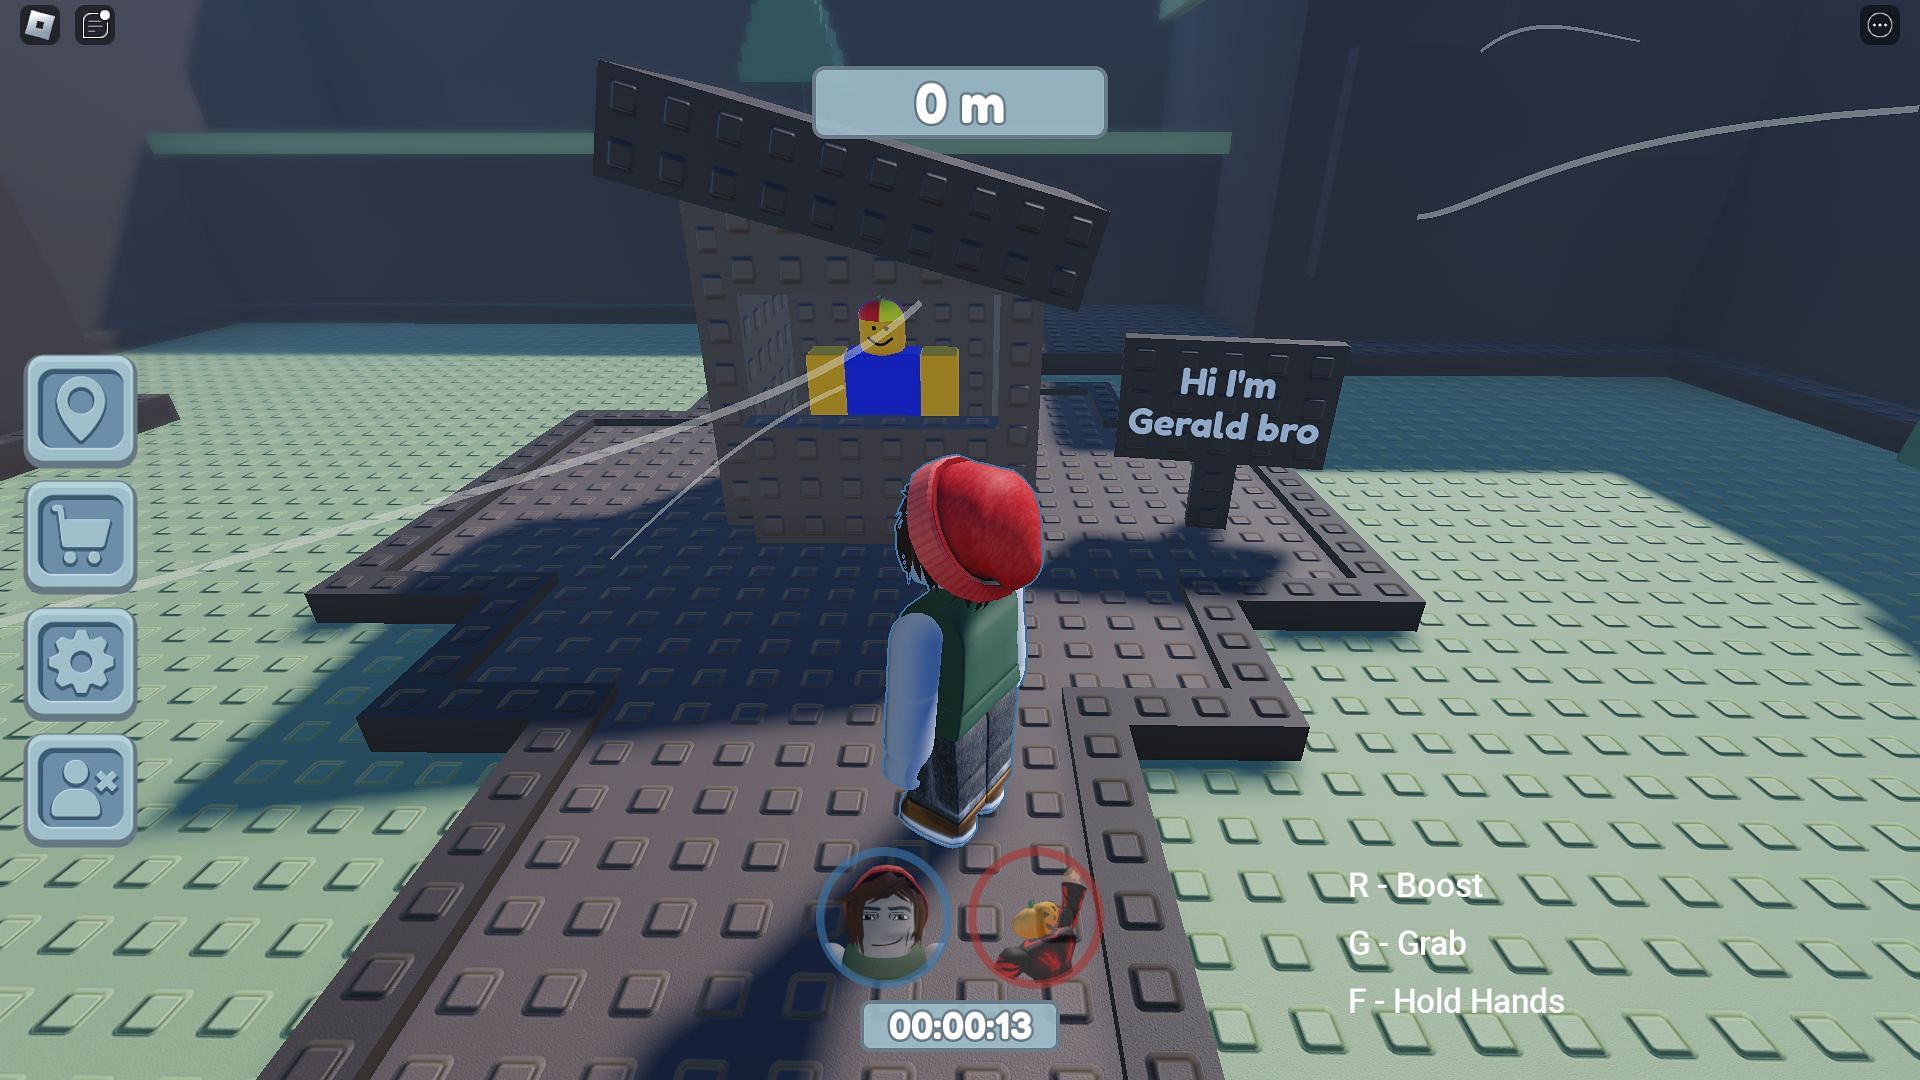 Cooperative actions are visible on screen (Image via Roblox)